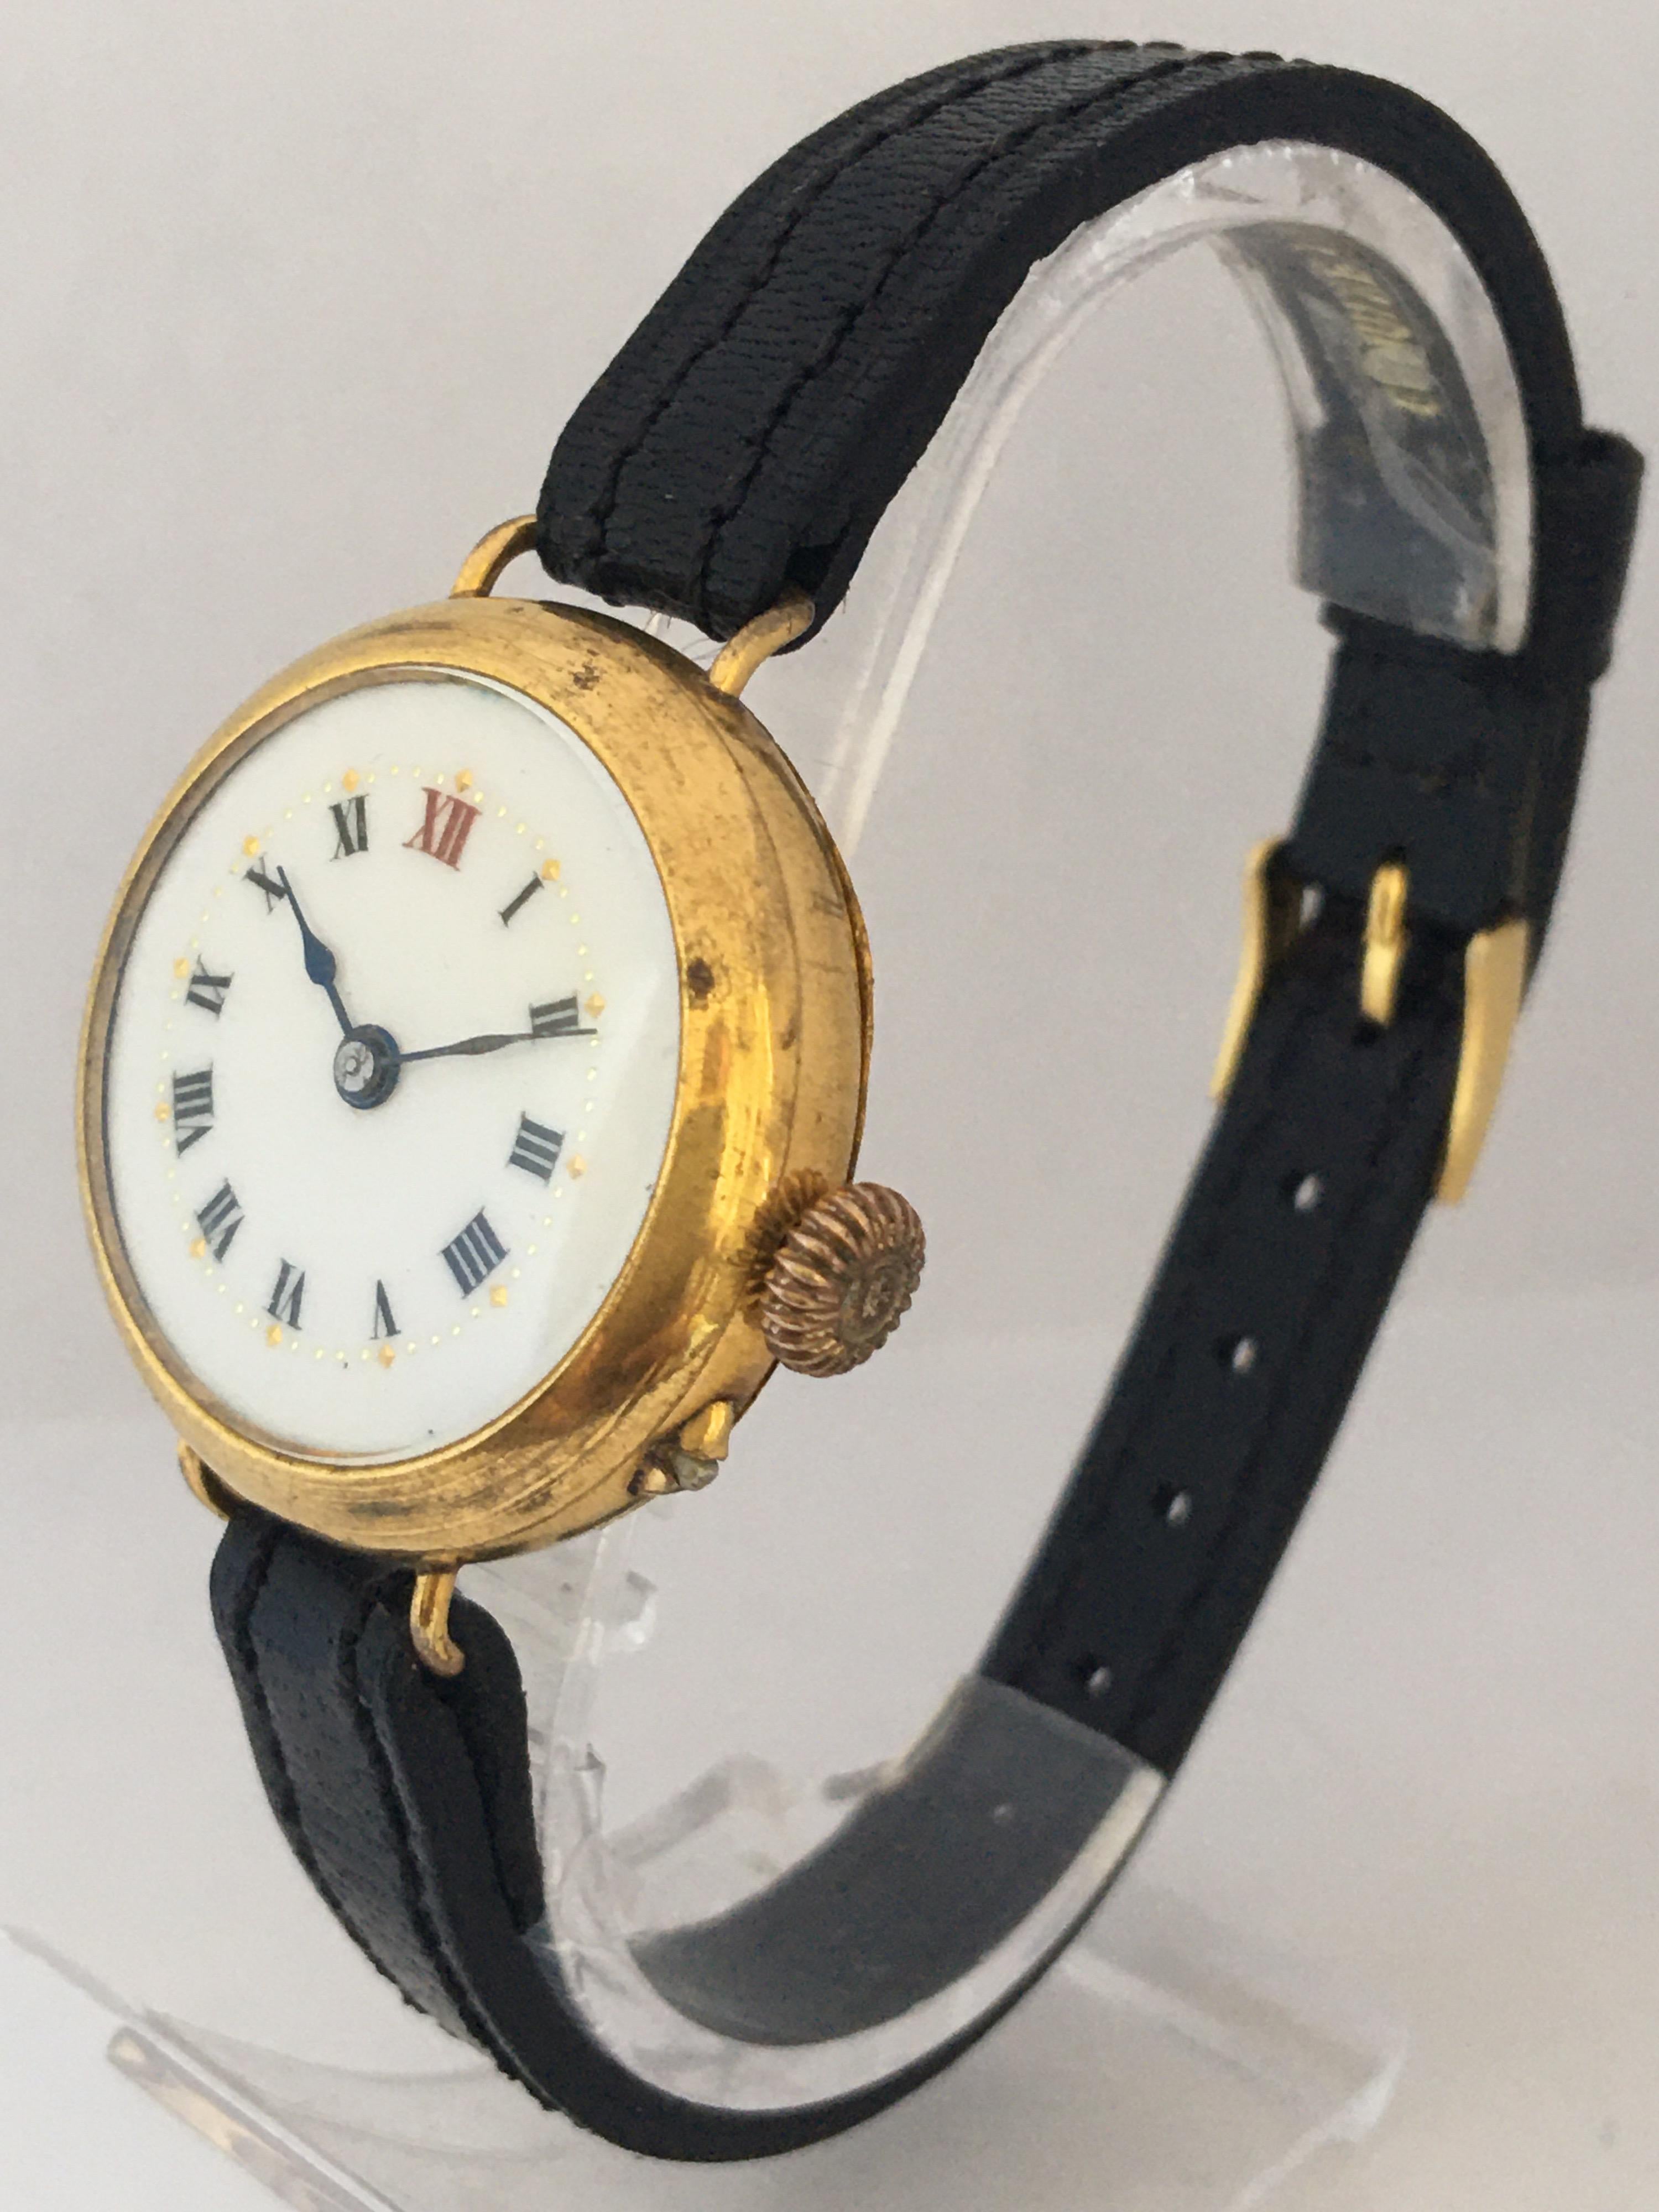 This beautiful pre-owned antique hand winding ladies trench watch is working and it is ticking well, but I cannot guarantee the time accuracy. Visible signs of ageing and wear with light scratches on the glass and on the watch case as shown. The